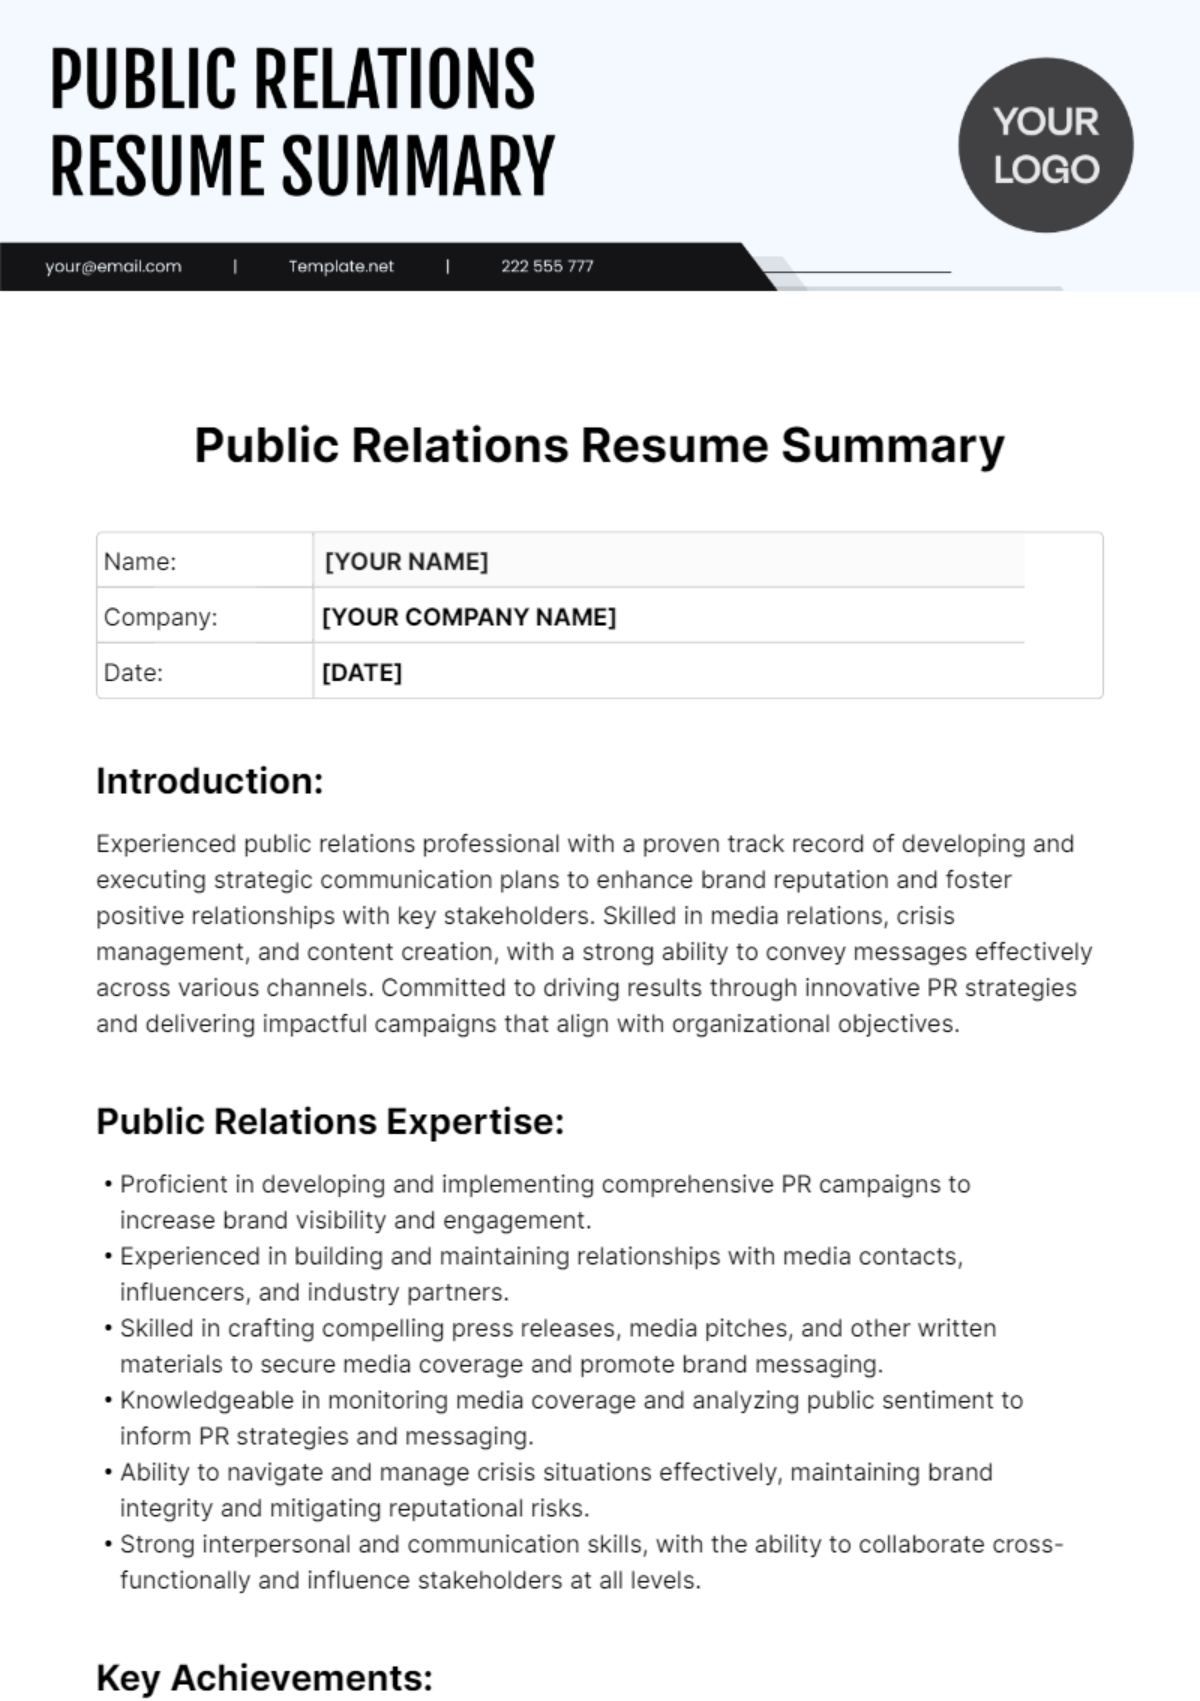 Free Public Relations Resume Summary Template